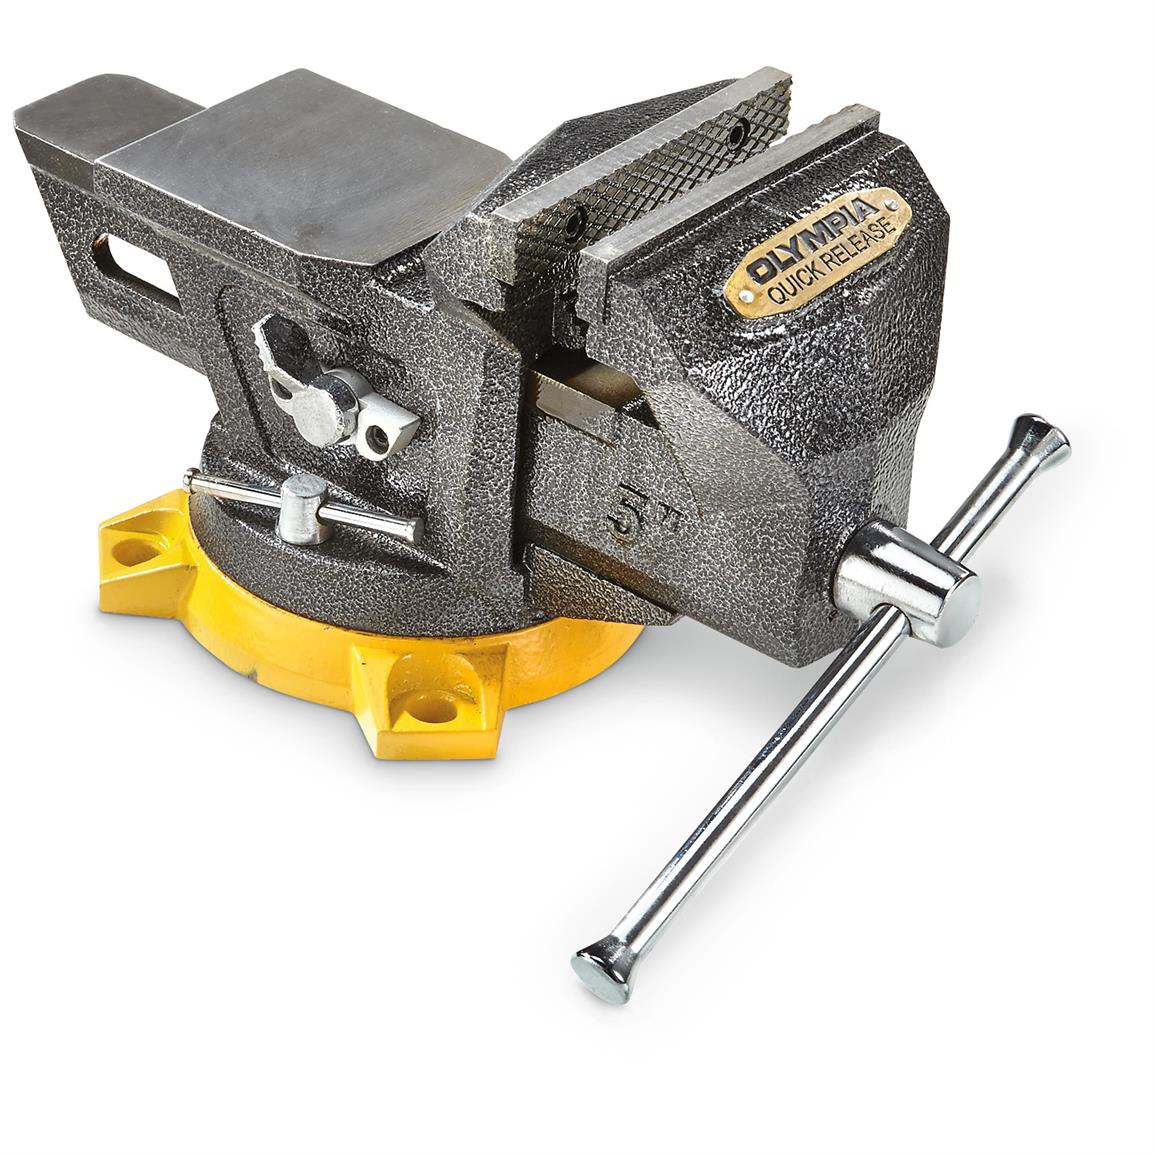 Bench vise with quick release